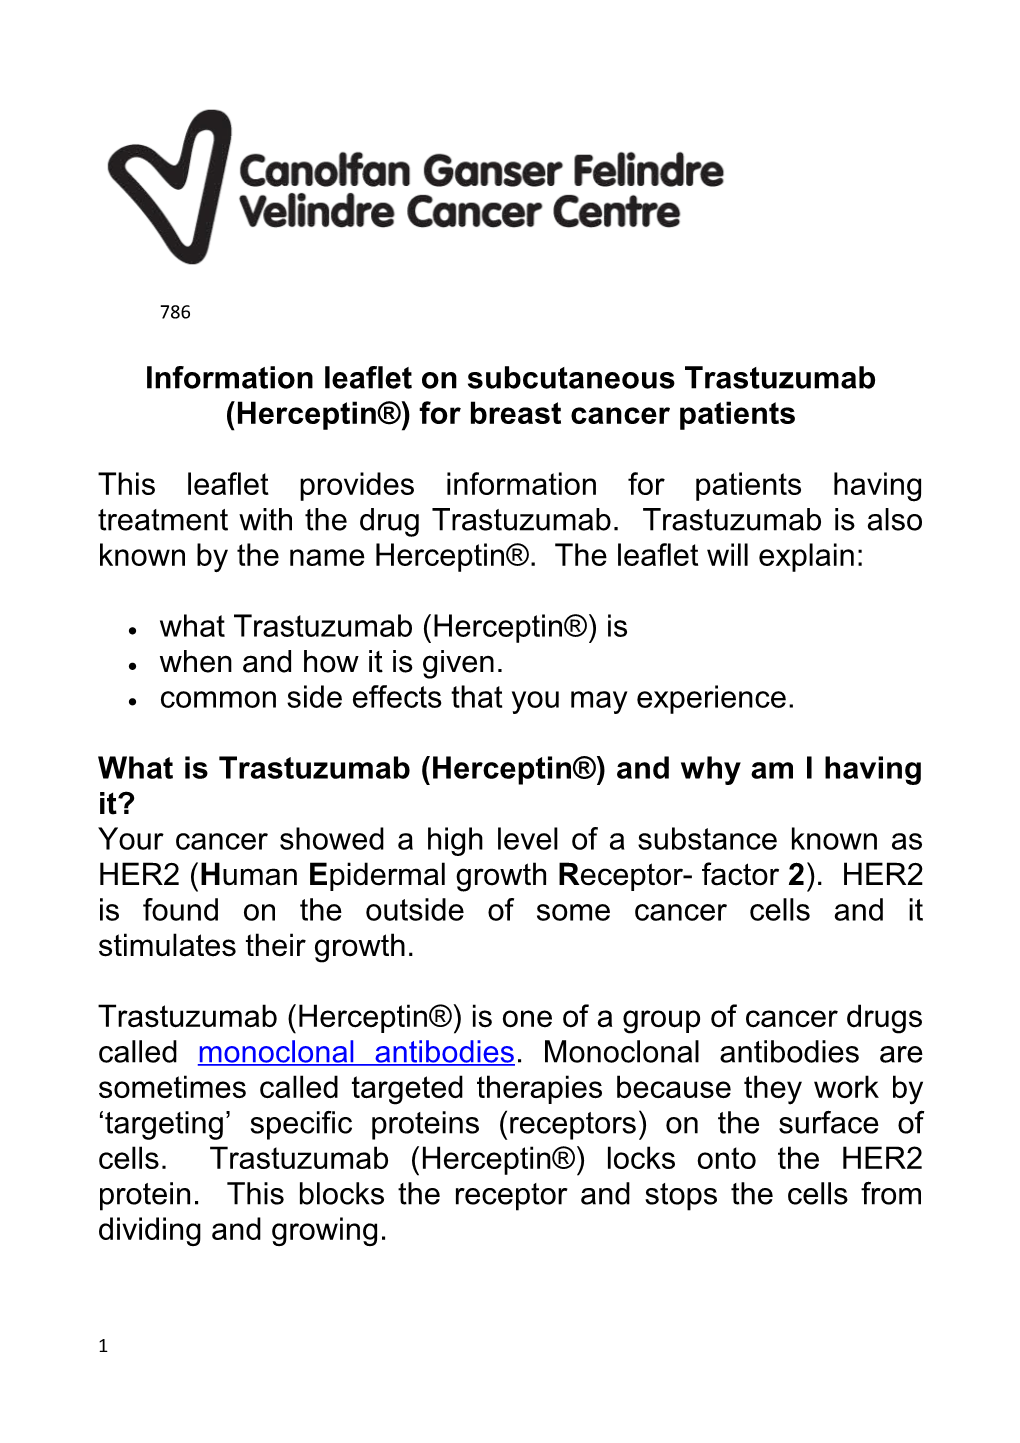 Information Leaflet on Subcutaneous Trastuzumab (Herceptin ) for Breast Cancer Patients